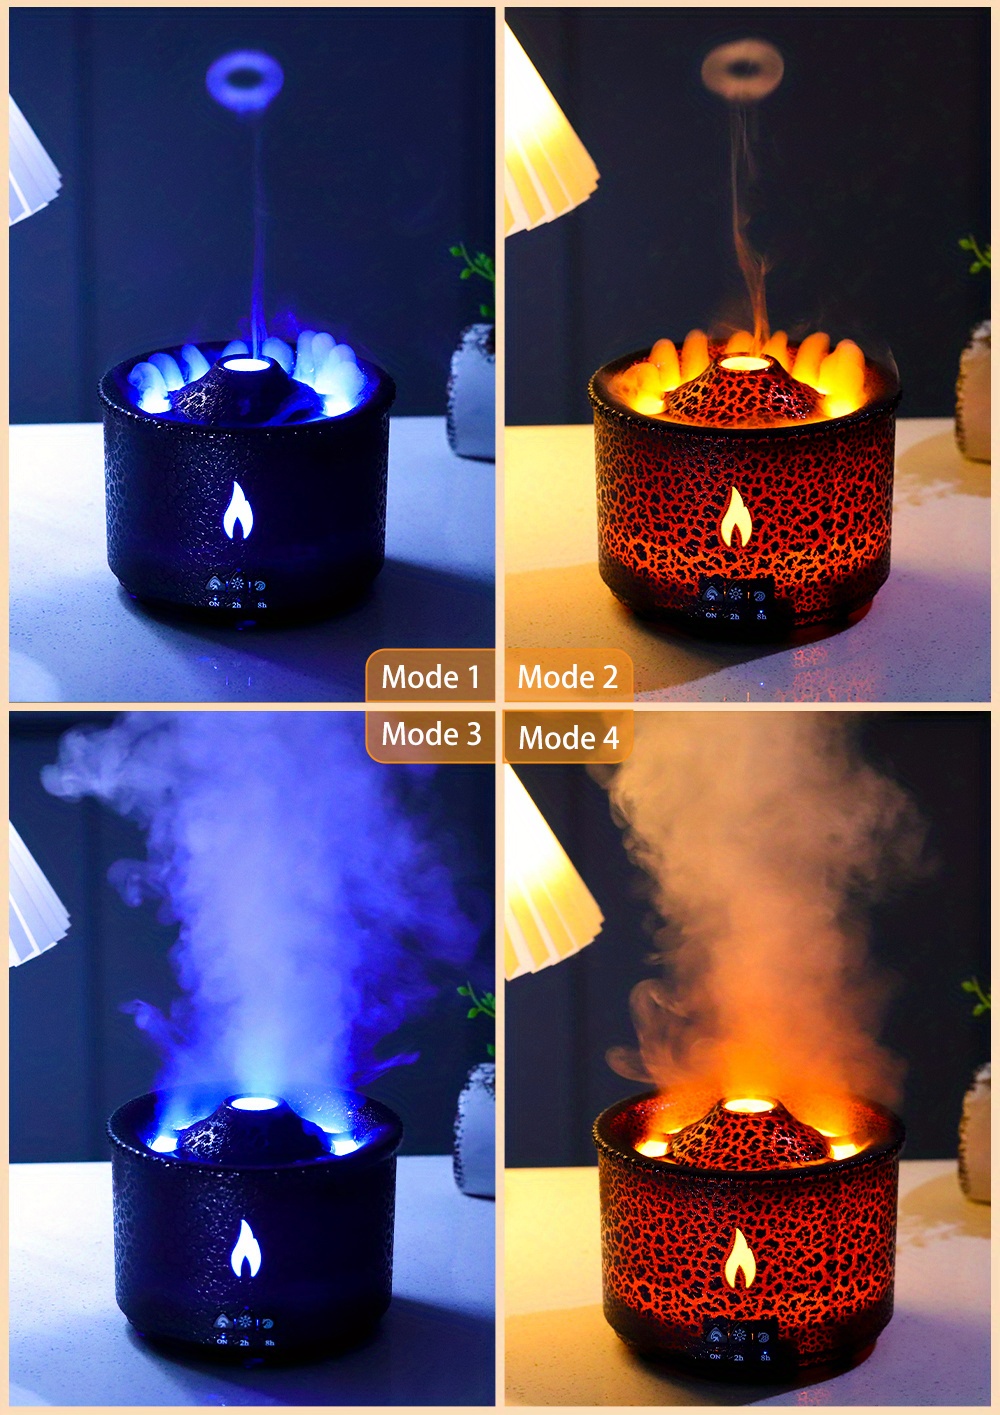 REUP Flame Aroma Diffuser Air Humidifier Ultrasonic Cool Mist Maker Fo –  Enchanted Oil diffuser